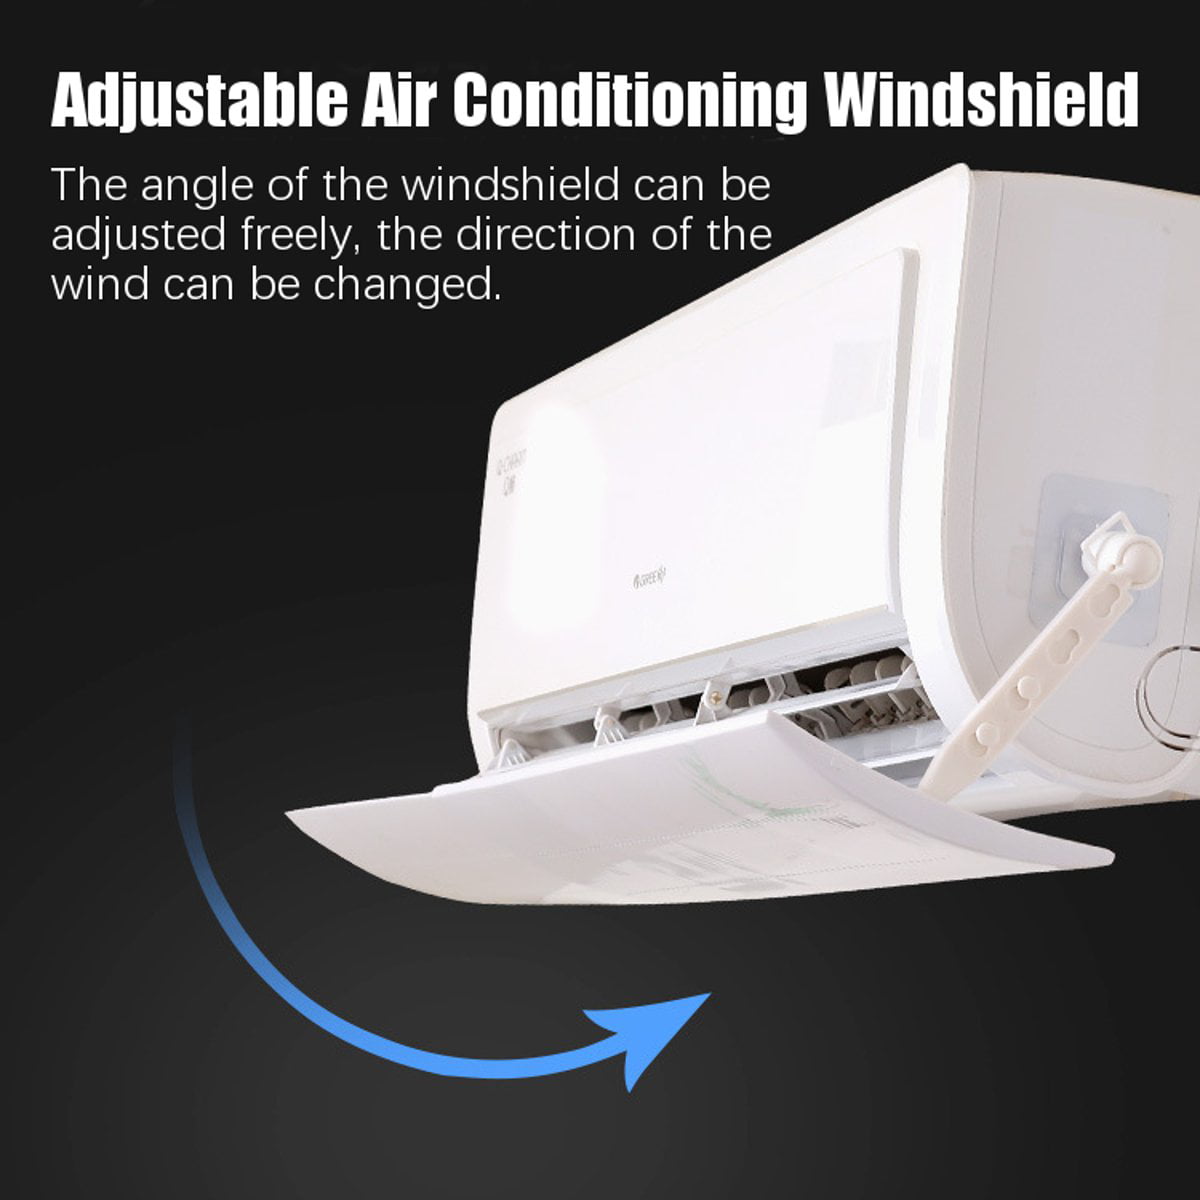 Adjustable Foldable Air Conditioner Deflector Confinement Air Deflector Outlet Air Wing Air Cooled Baffle Wind Direction Windshield for Home 